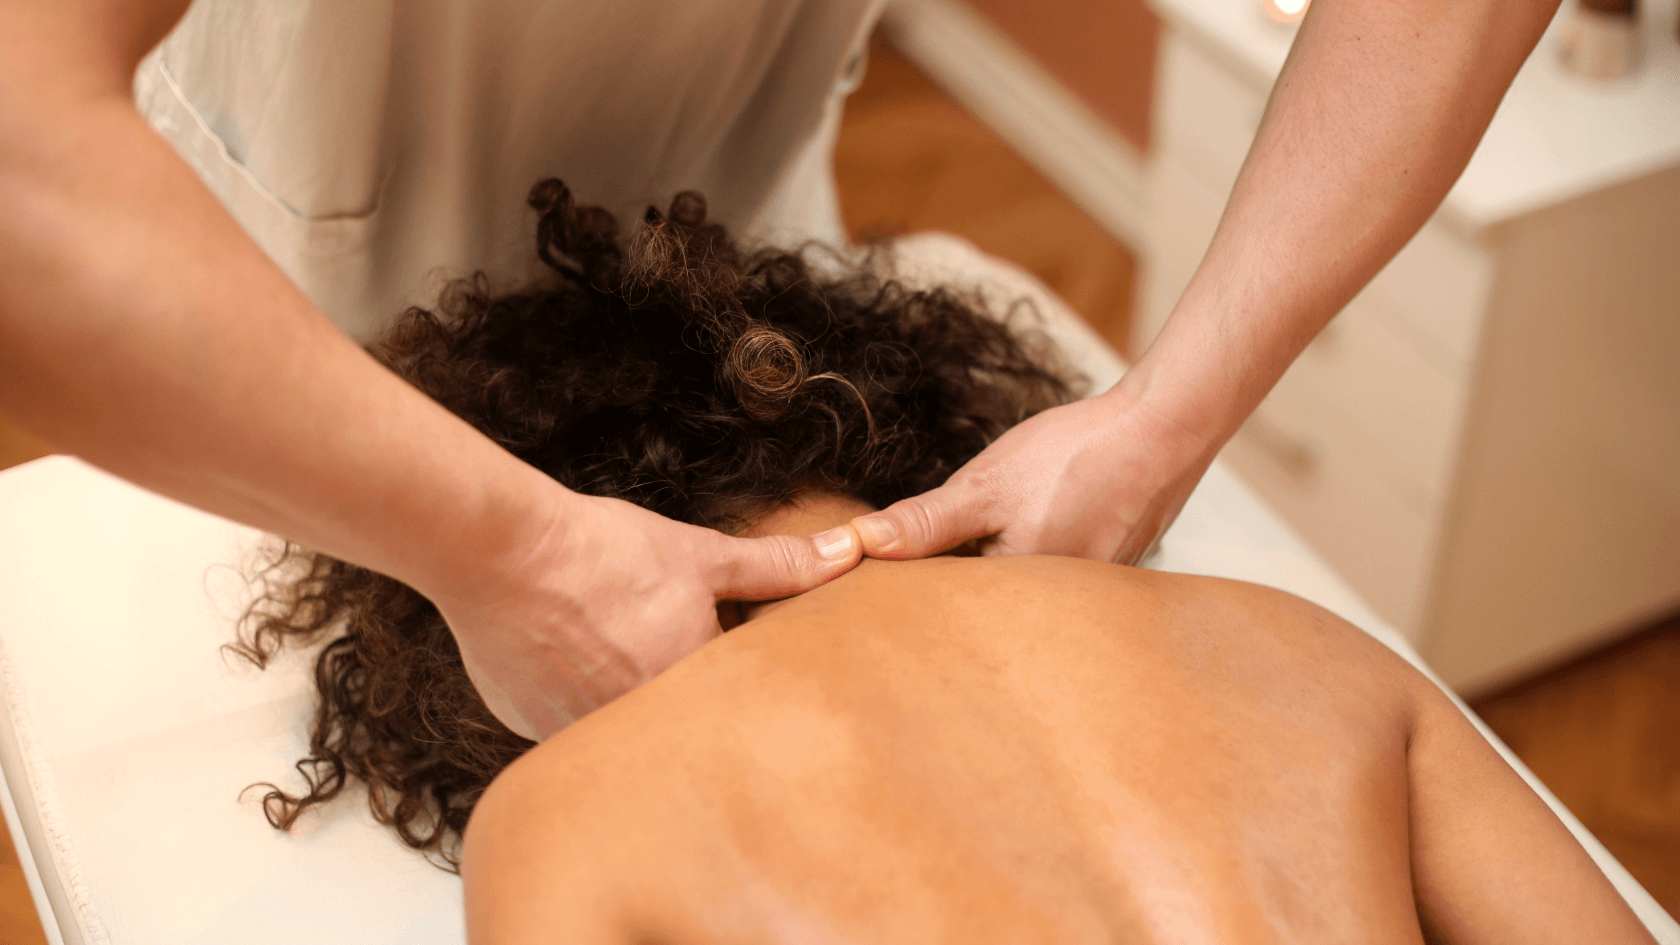 How Massage Can Help Alleviate Knots & Pain in the Neck & Shoulder